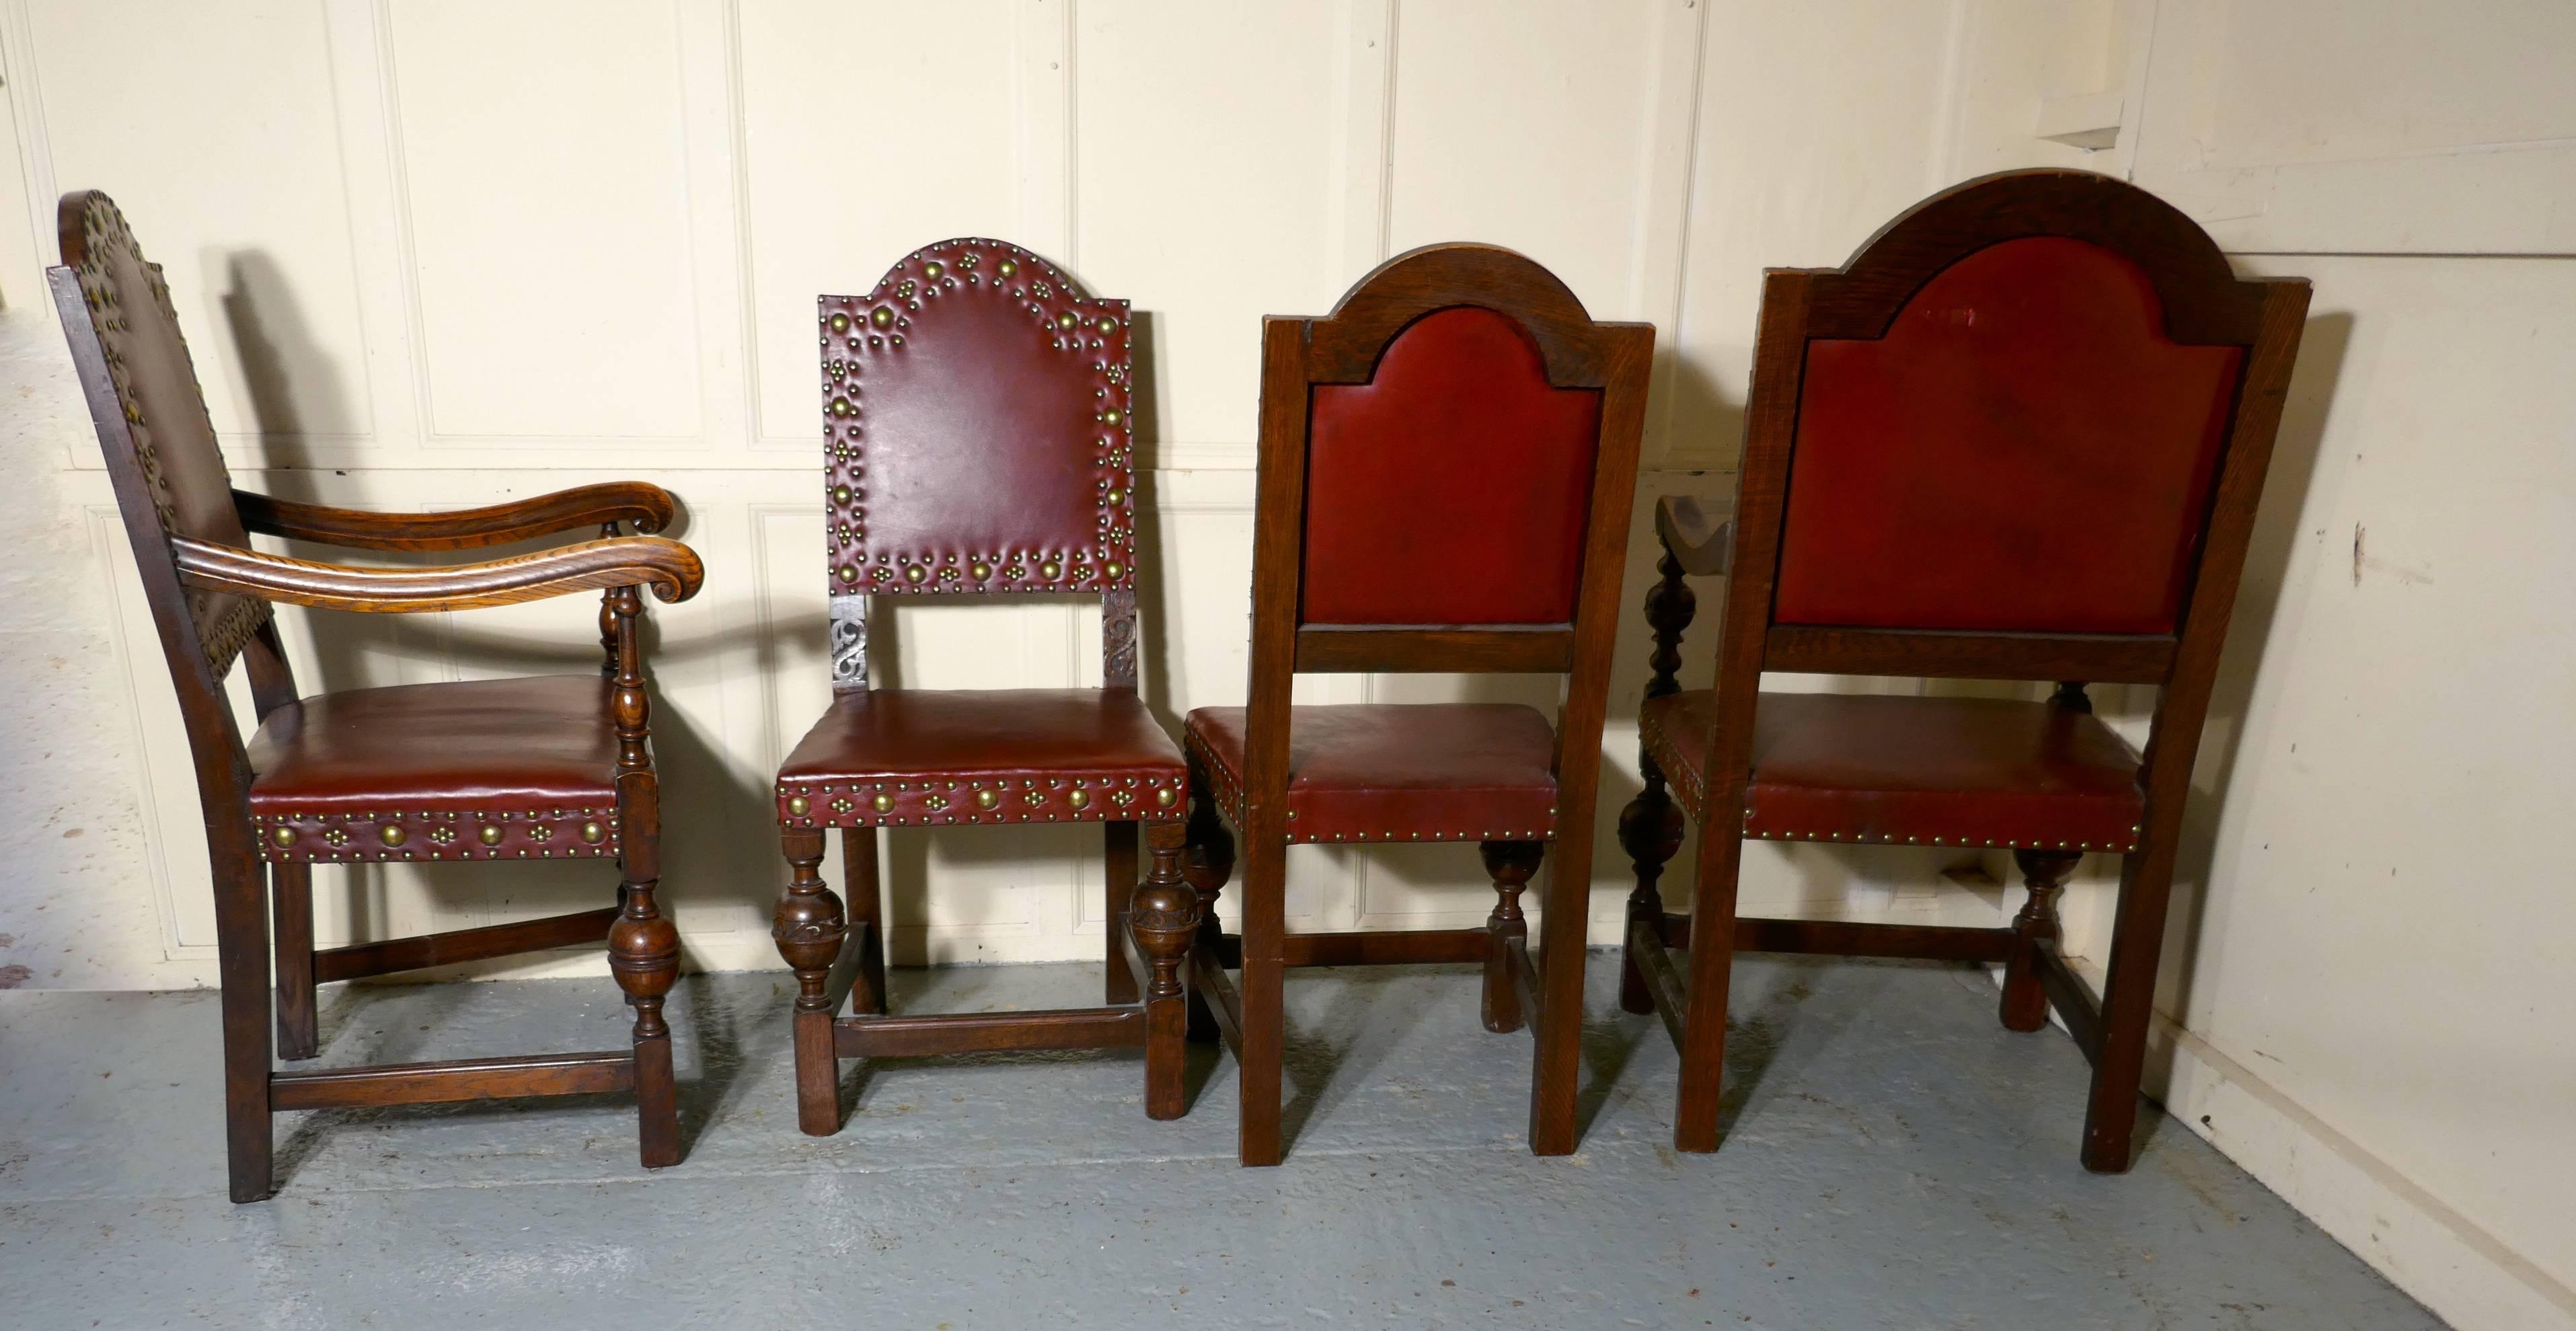 Set of eight Gothic oak dining chairs by Gillows
 
This is a superb quality heavy weight set of dining chairs by Gillows
The set has two carver and six single chairs, they are upholstered in dark red leather with brass studs decorating the high